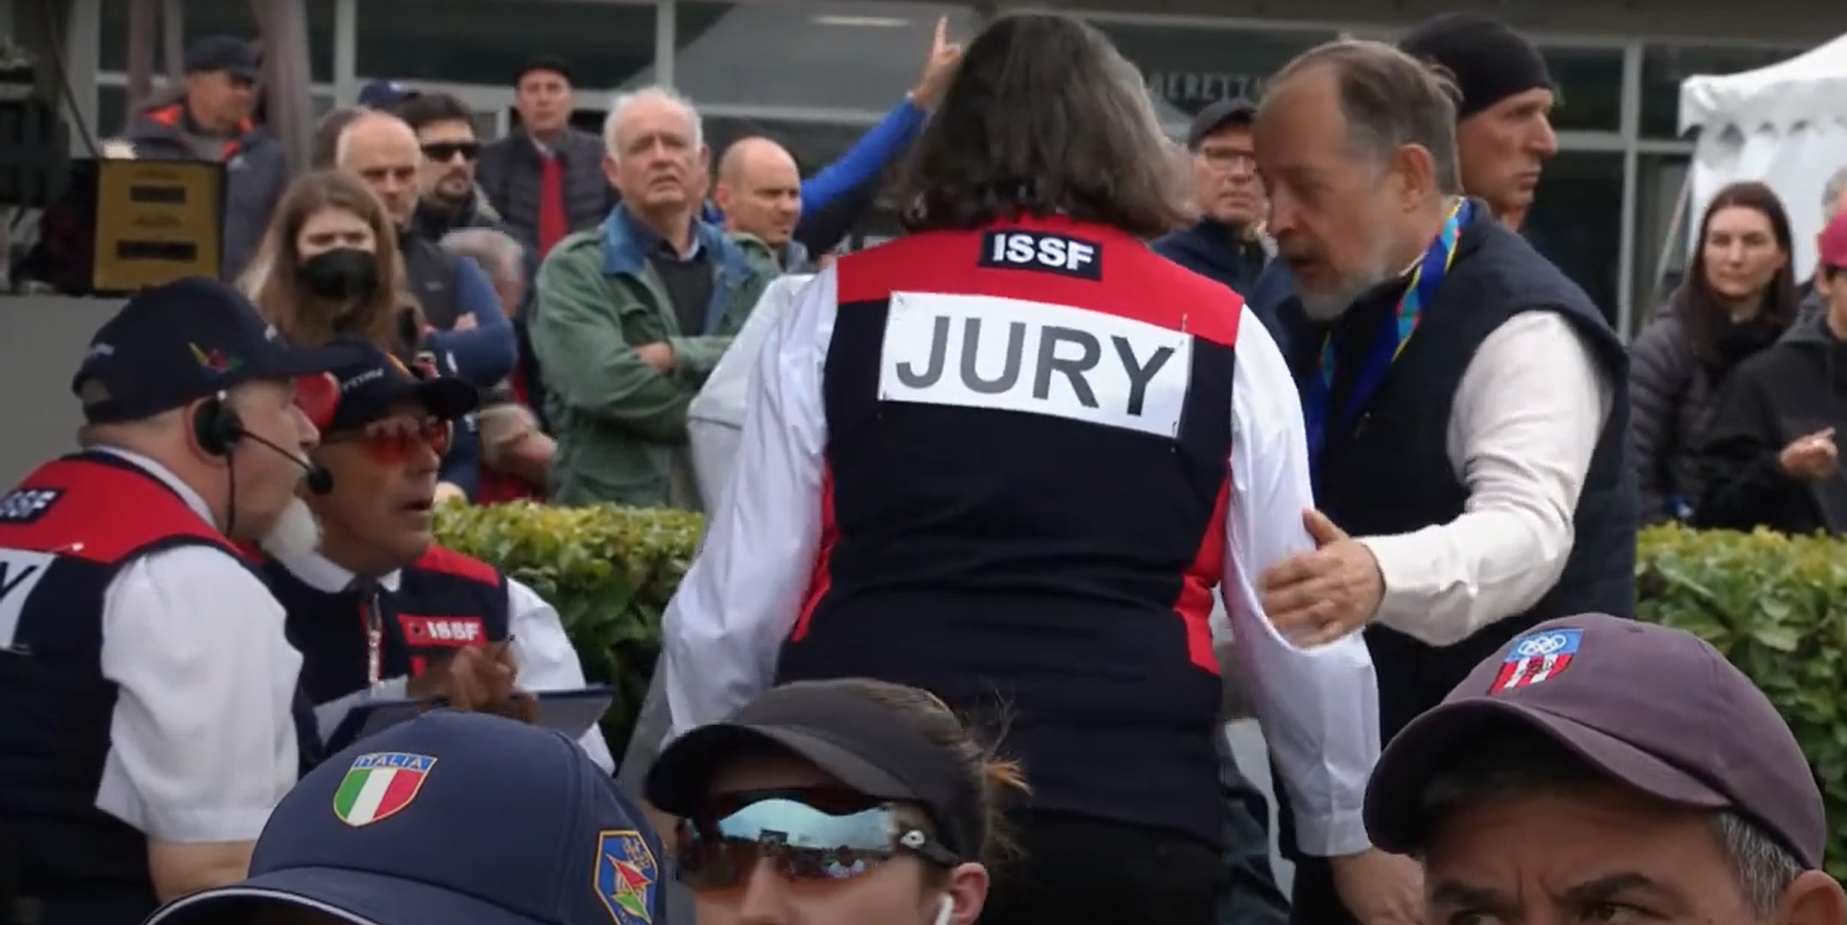 ISSF President Vladimir Lisin personally intervened during the last Shotgun World Cup in Lonato to protest about a number of issues ©ISSF/YouTube